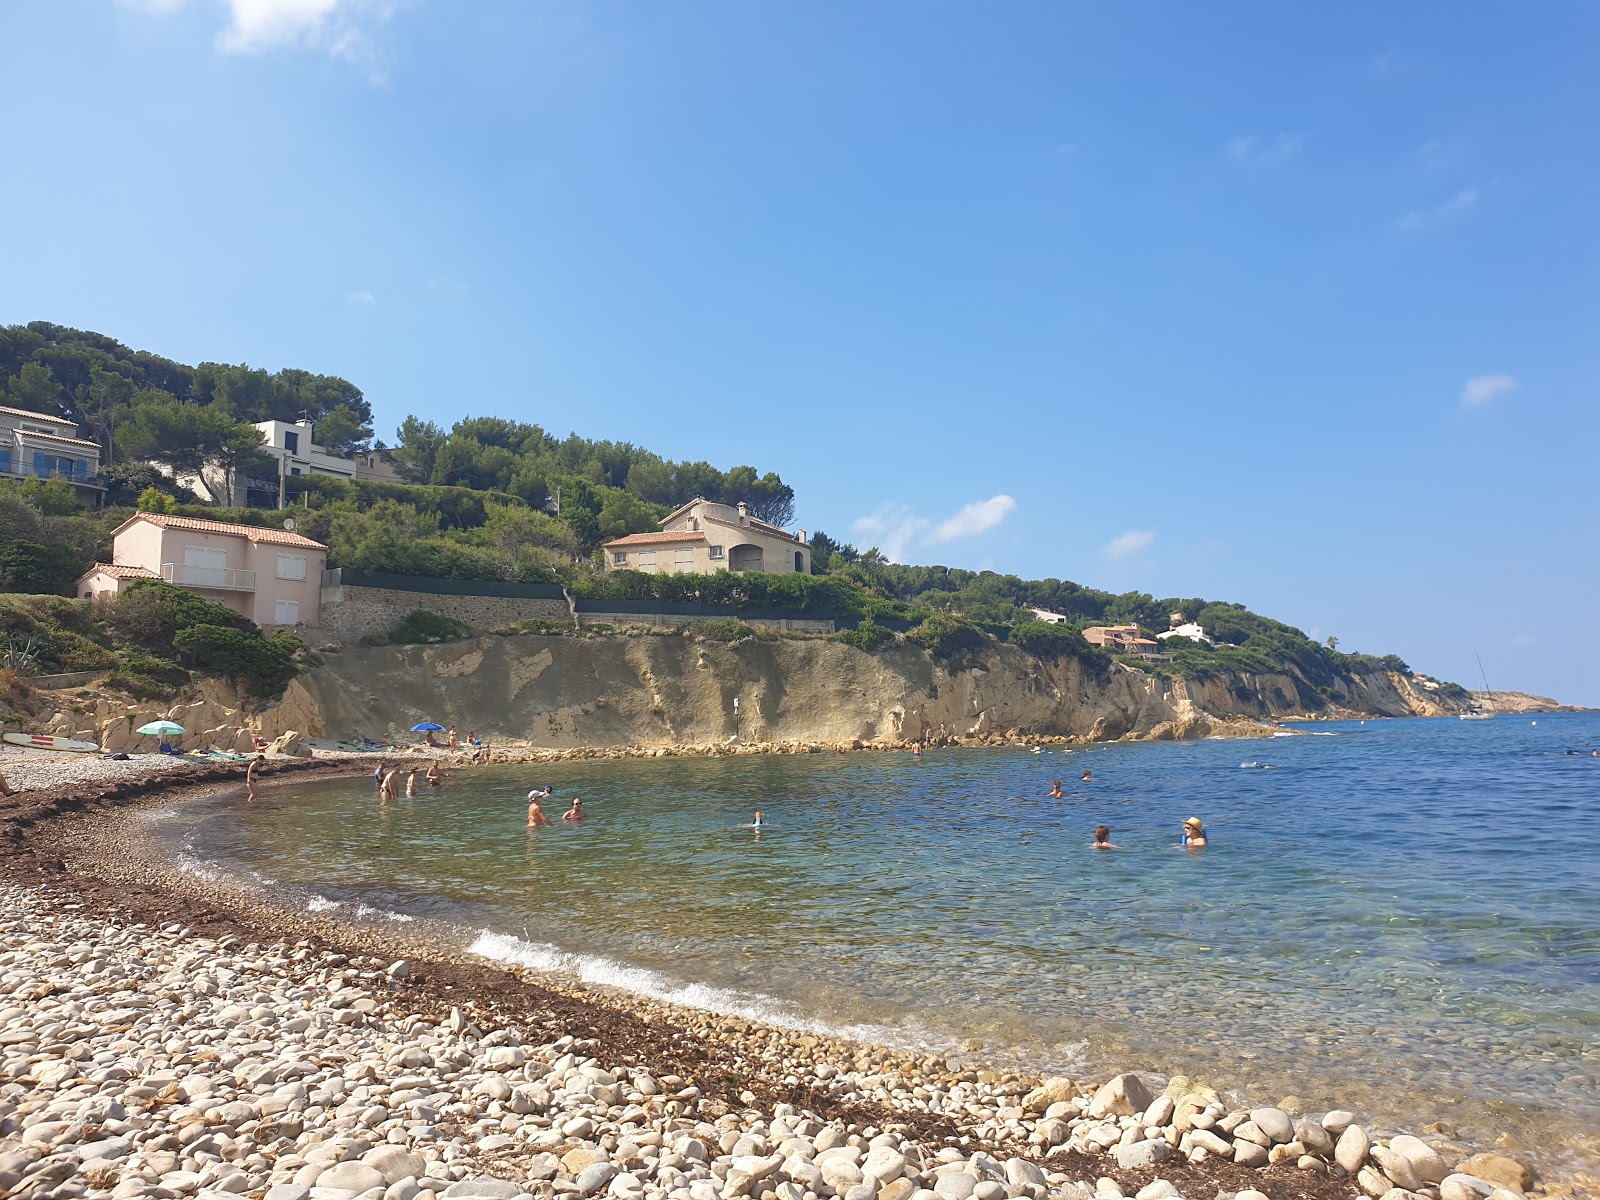 Photo of Plage de beaucours and the settlement